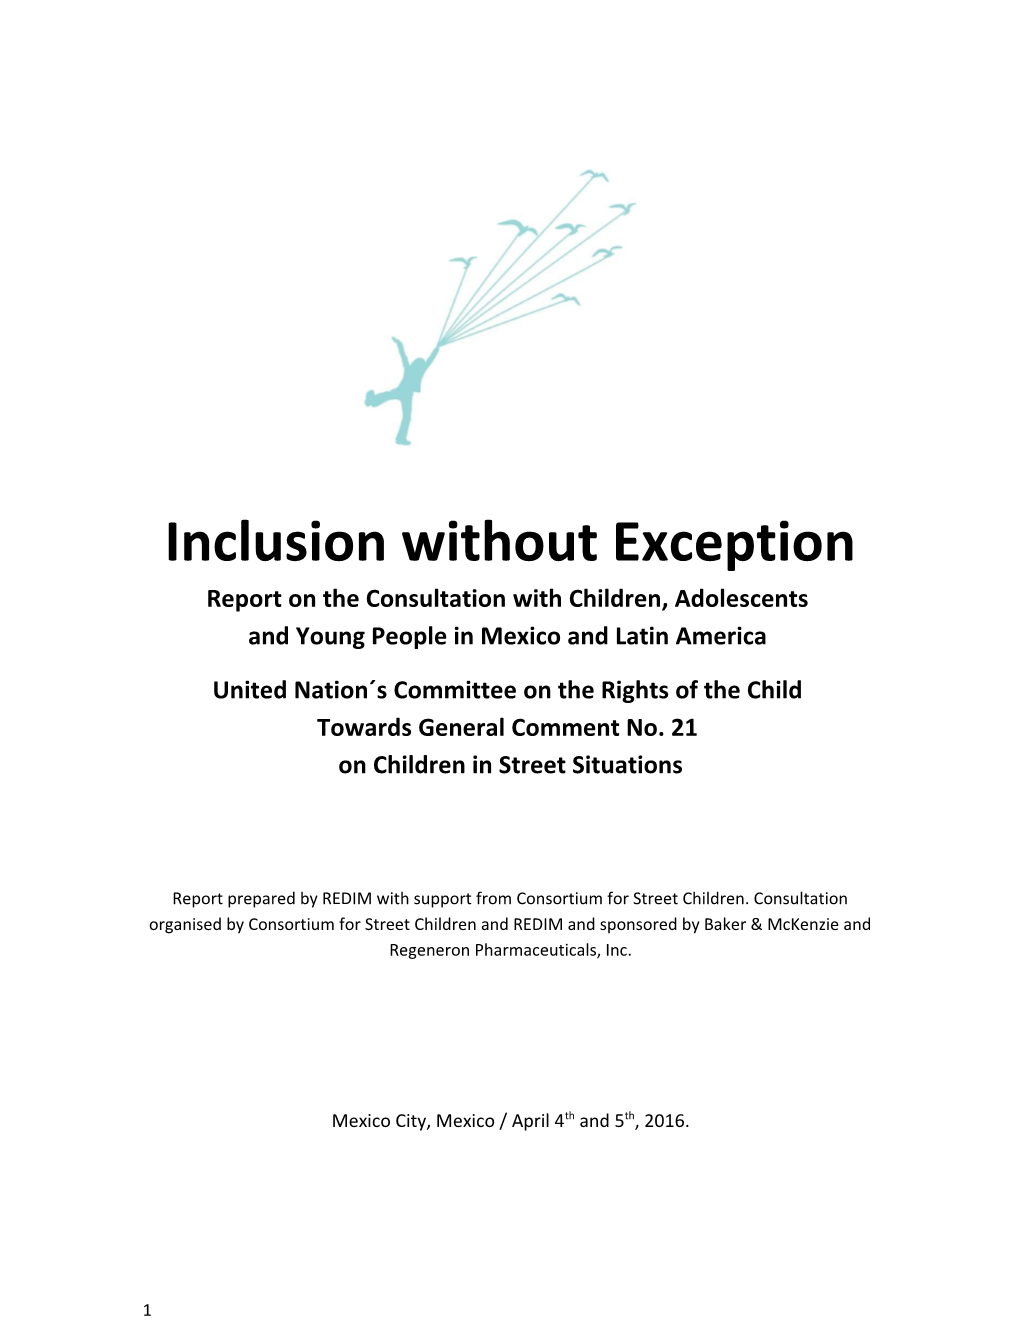 Inclusion Without Exception Report on the Consultation with Children, Adolescents And